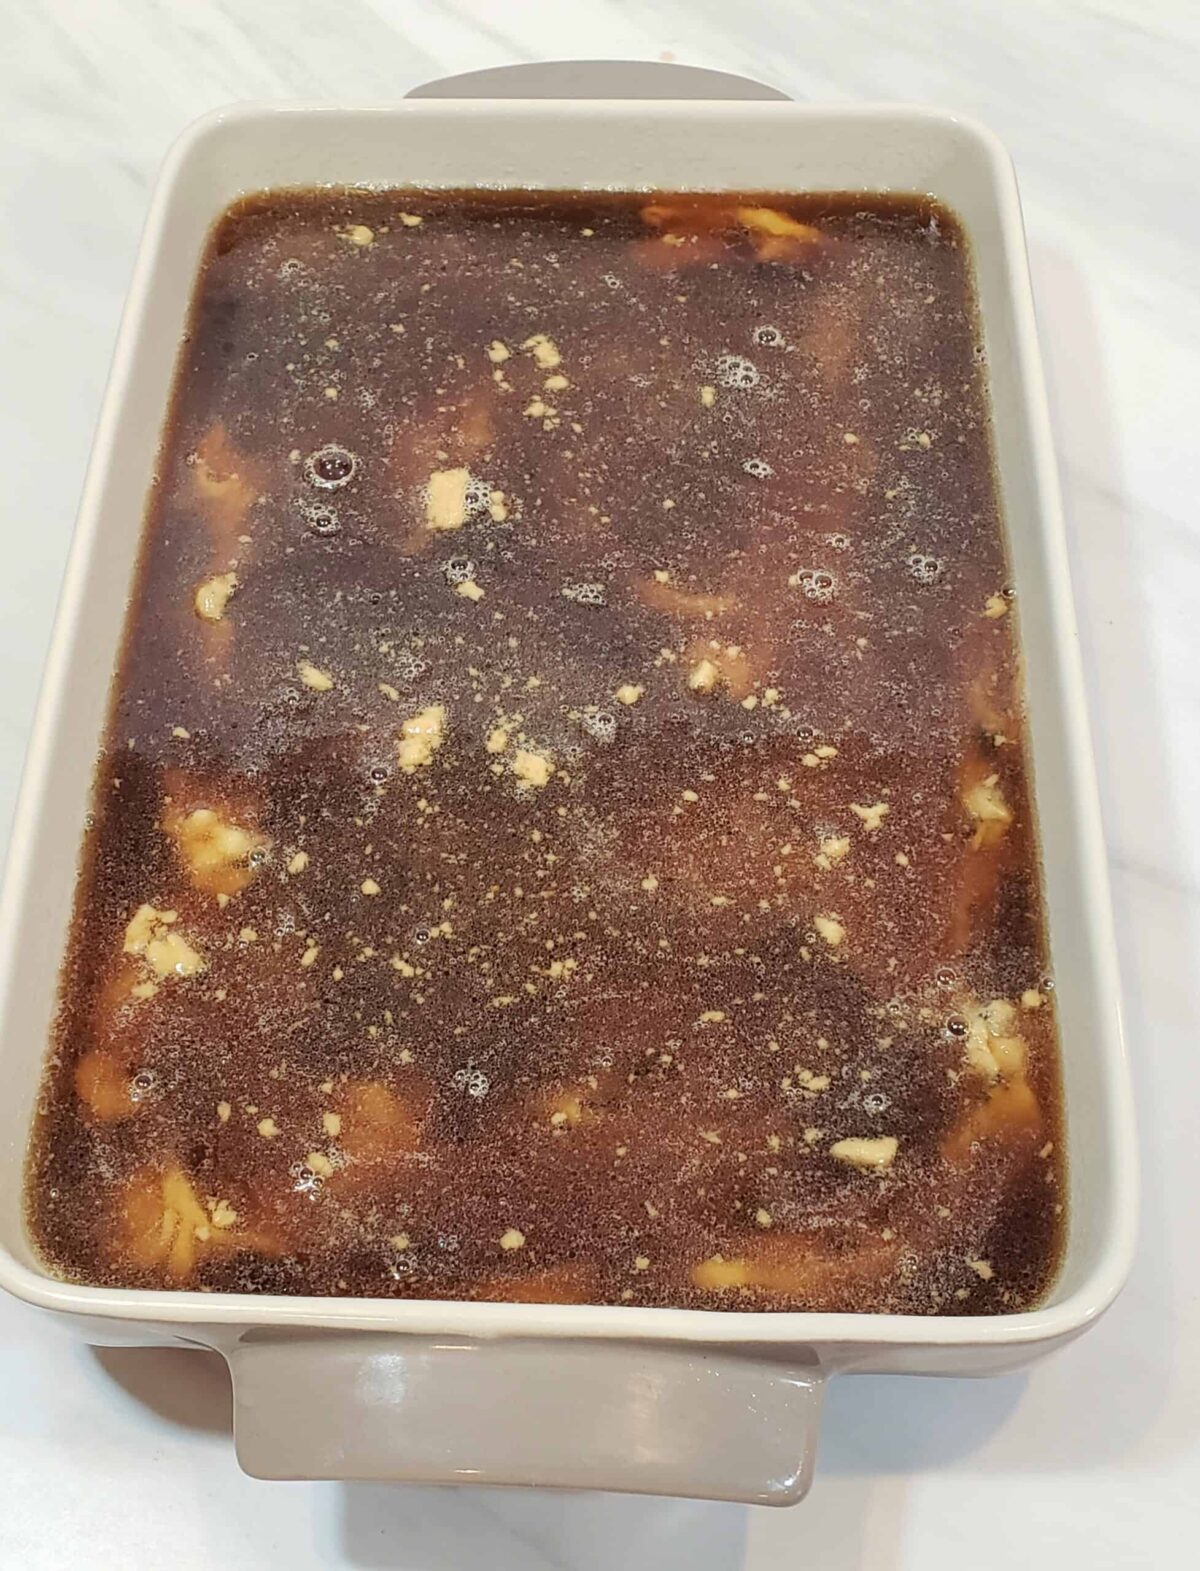 Mission fig cake with hot water and brown sugar on top